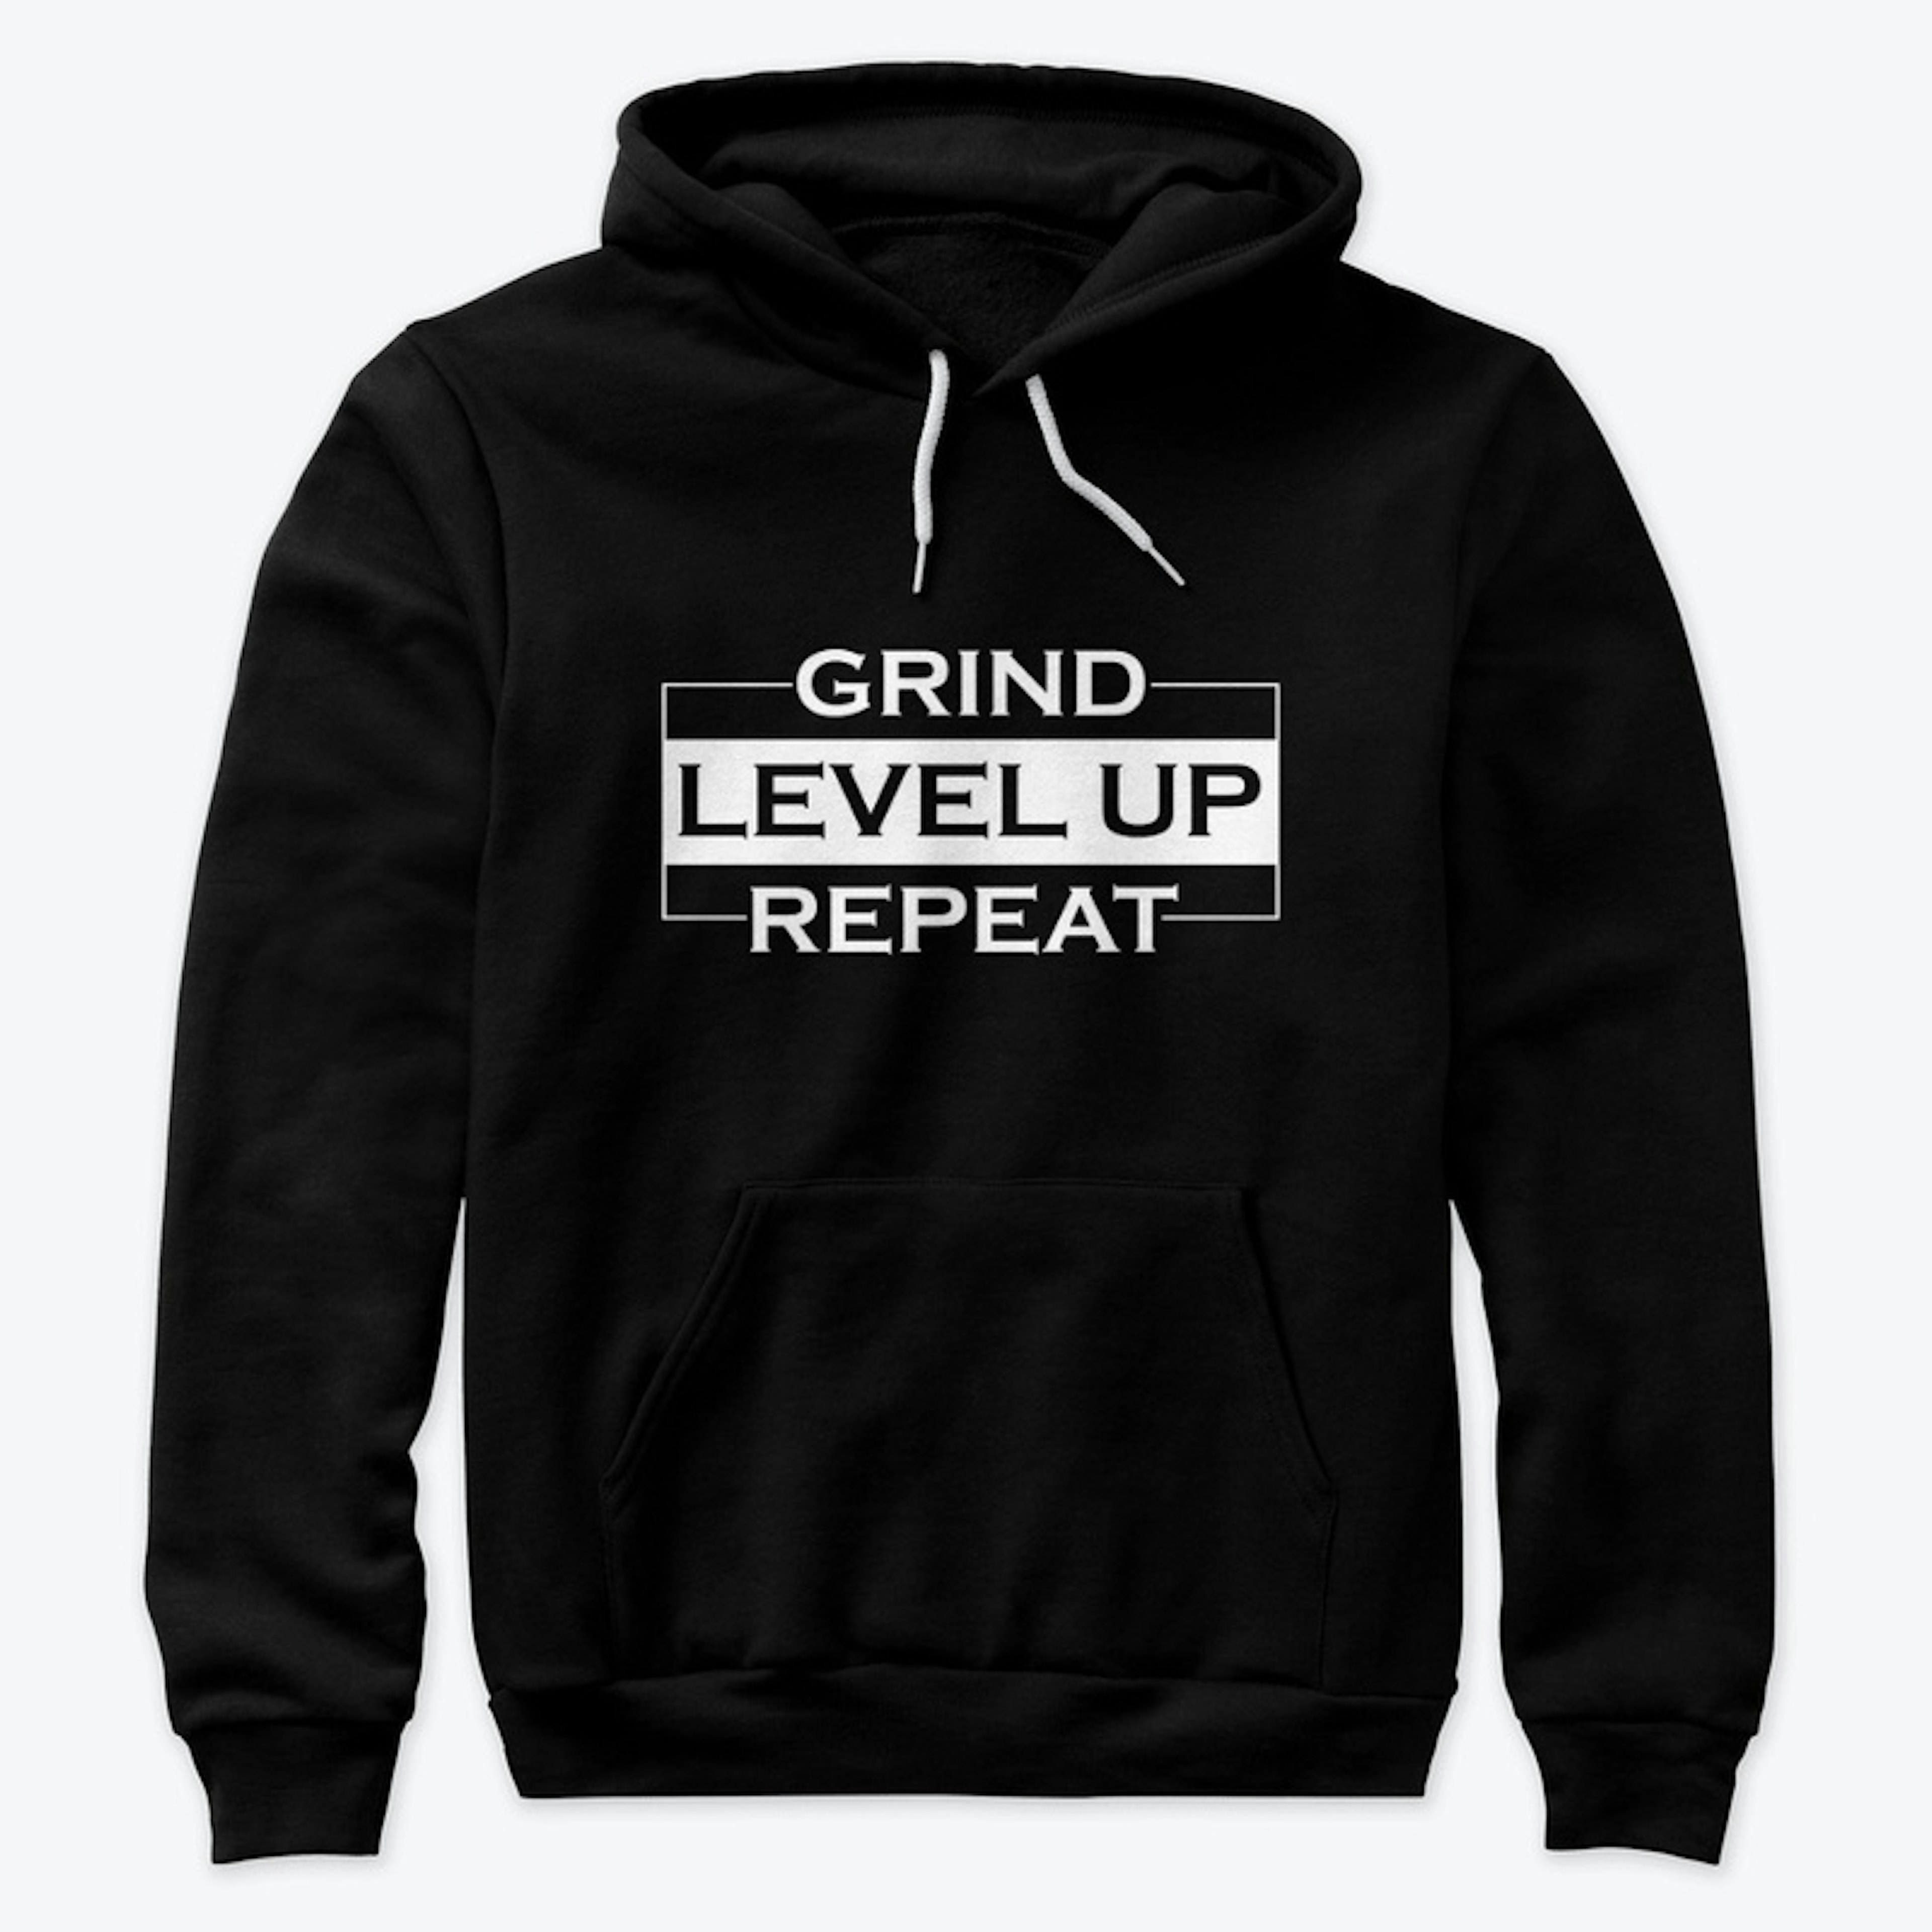 Grind - Level Up - Repeat (White Print)